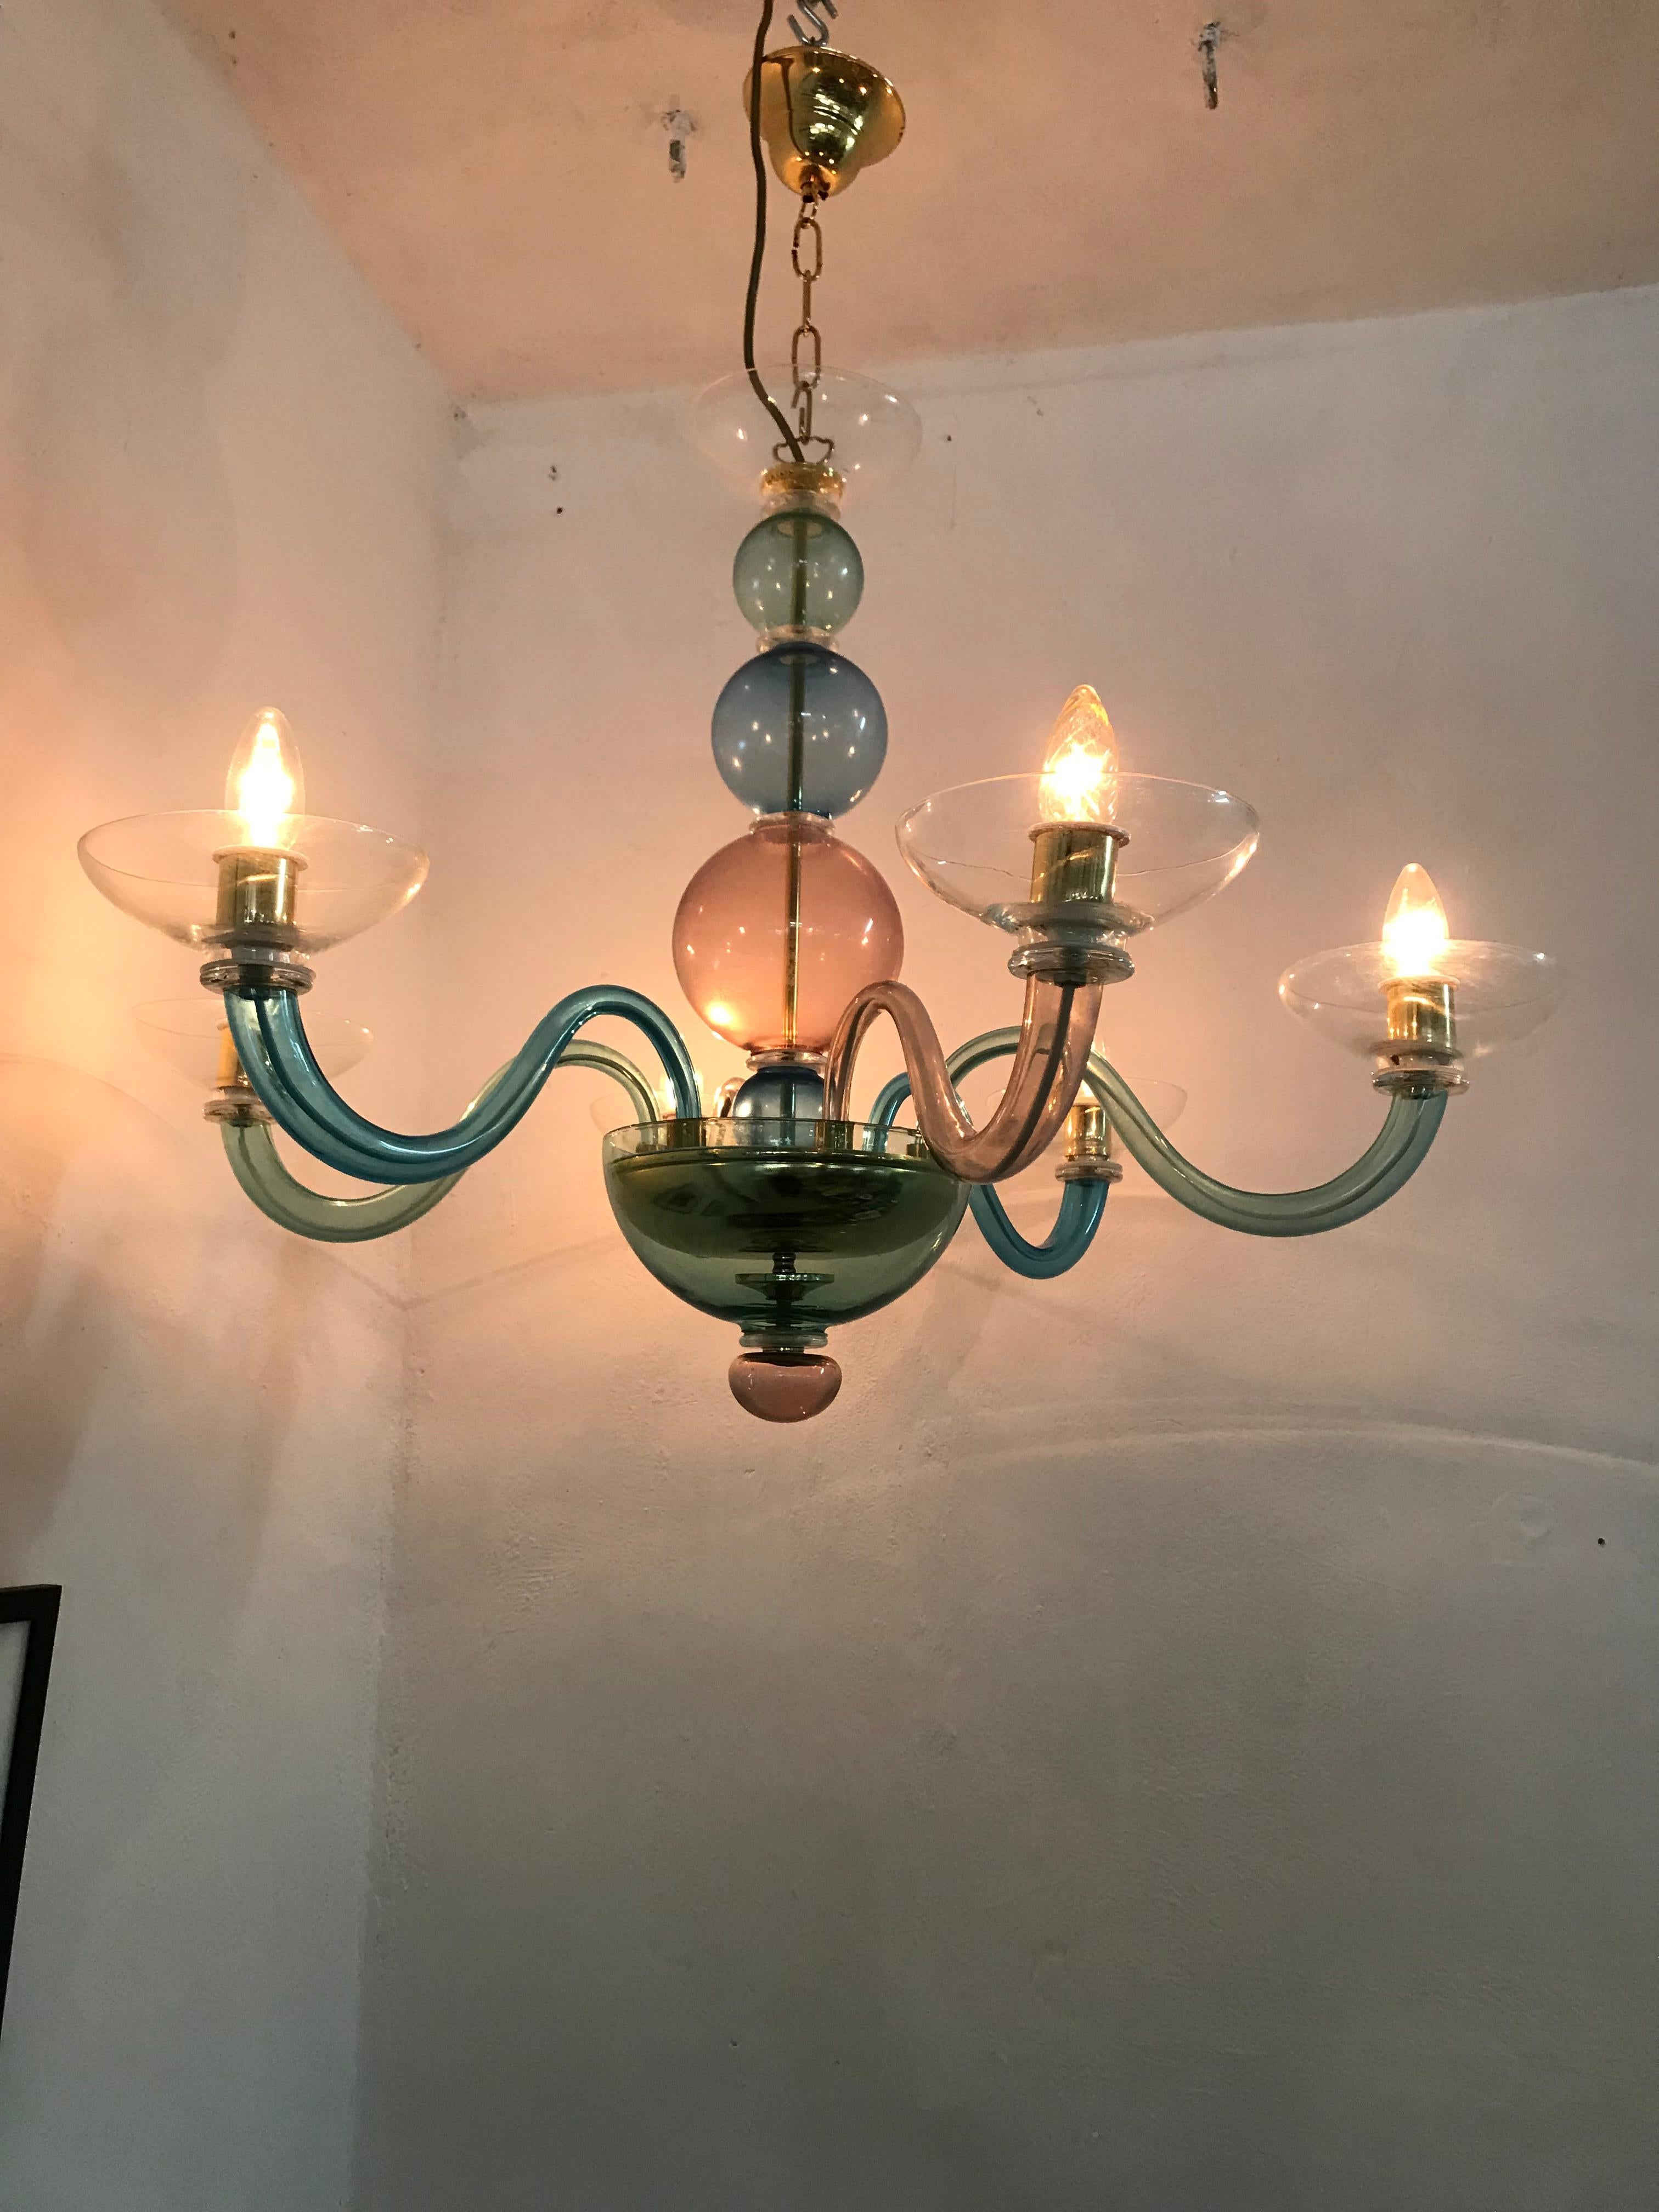 Six light multicolored chandelier made in the style of Gio Ponti's designs in hand blown Murano glass, Italy, circa 1970s
Measures: Height without the chain is 26 